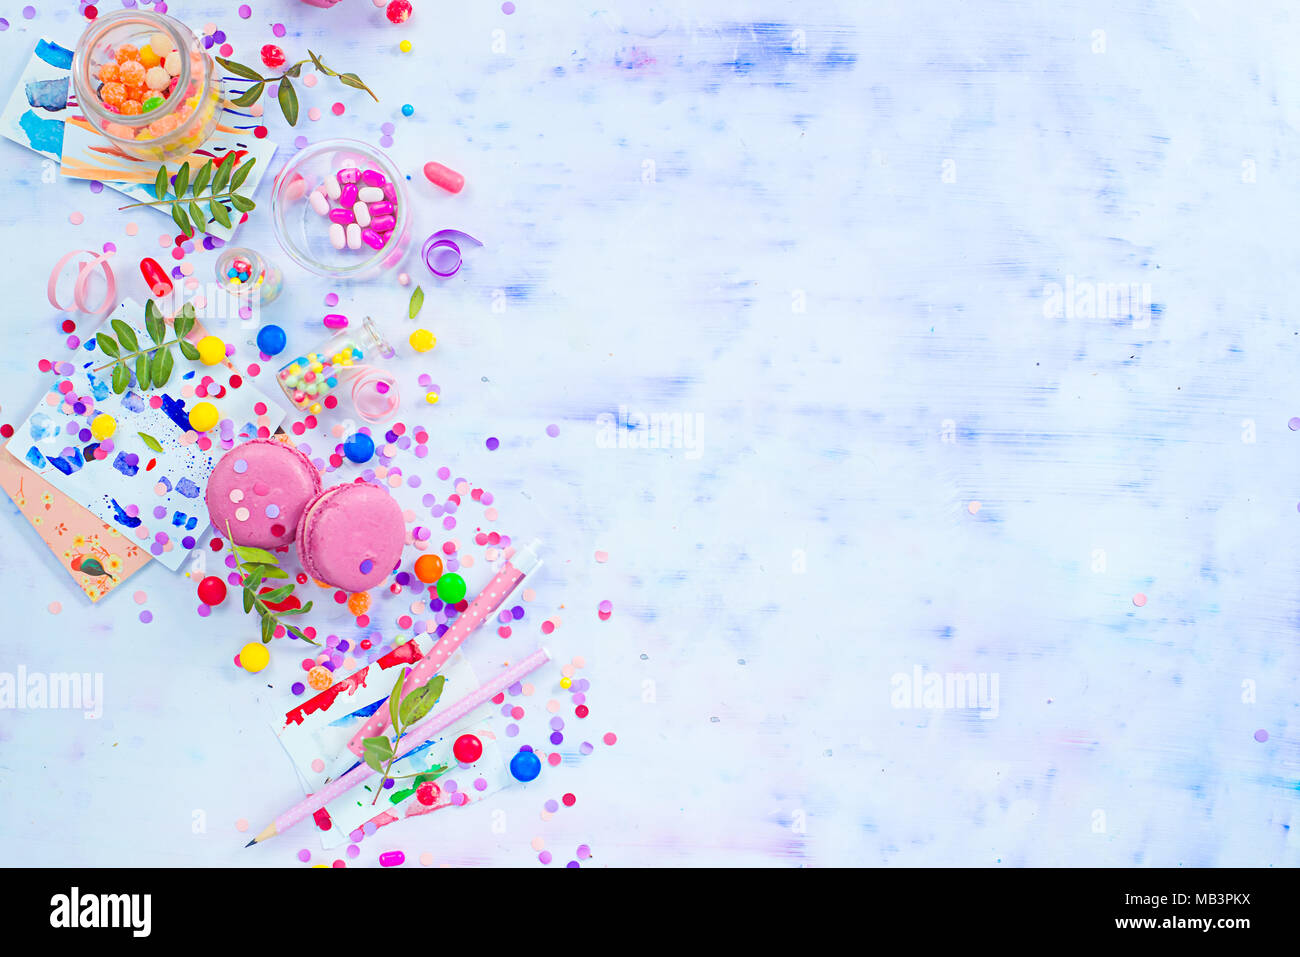 Colorful celebration flat lay with party supplies, confetti and sweets. Pink macarons overhead scene with copy space. Stock Photo